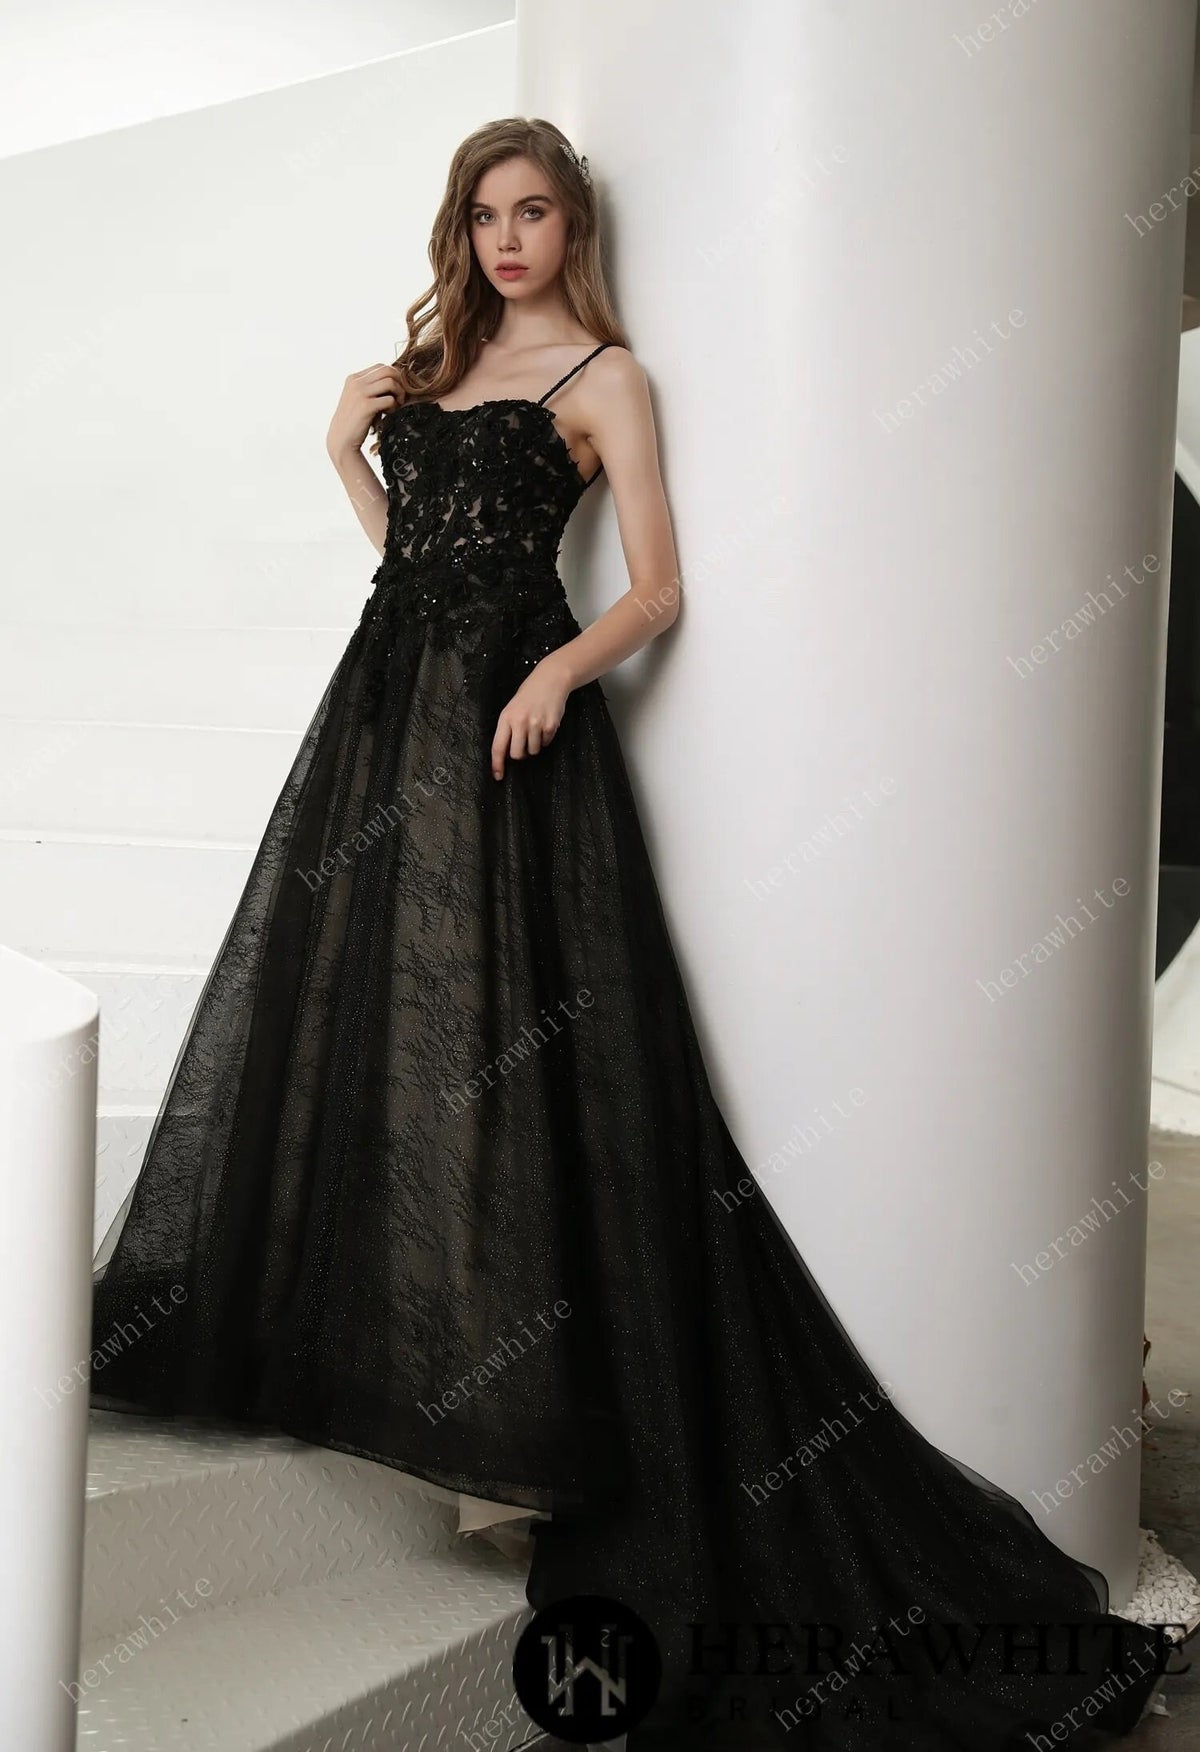 Gothic Black Illusion Lace Wedding Dress with Detachable Long Sleeves Aline Sparkle Dress Black and Nude Straps Sweetheart Neckline